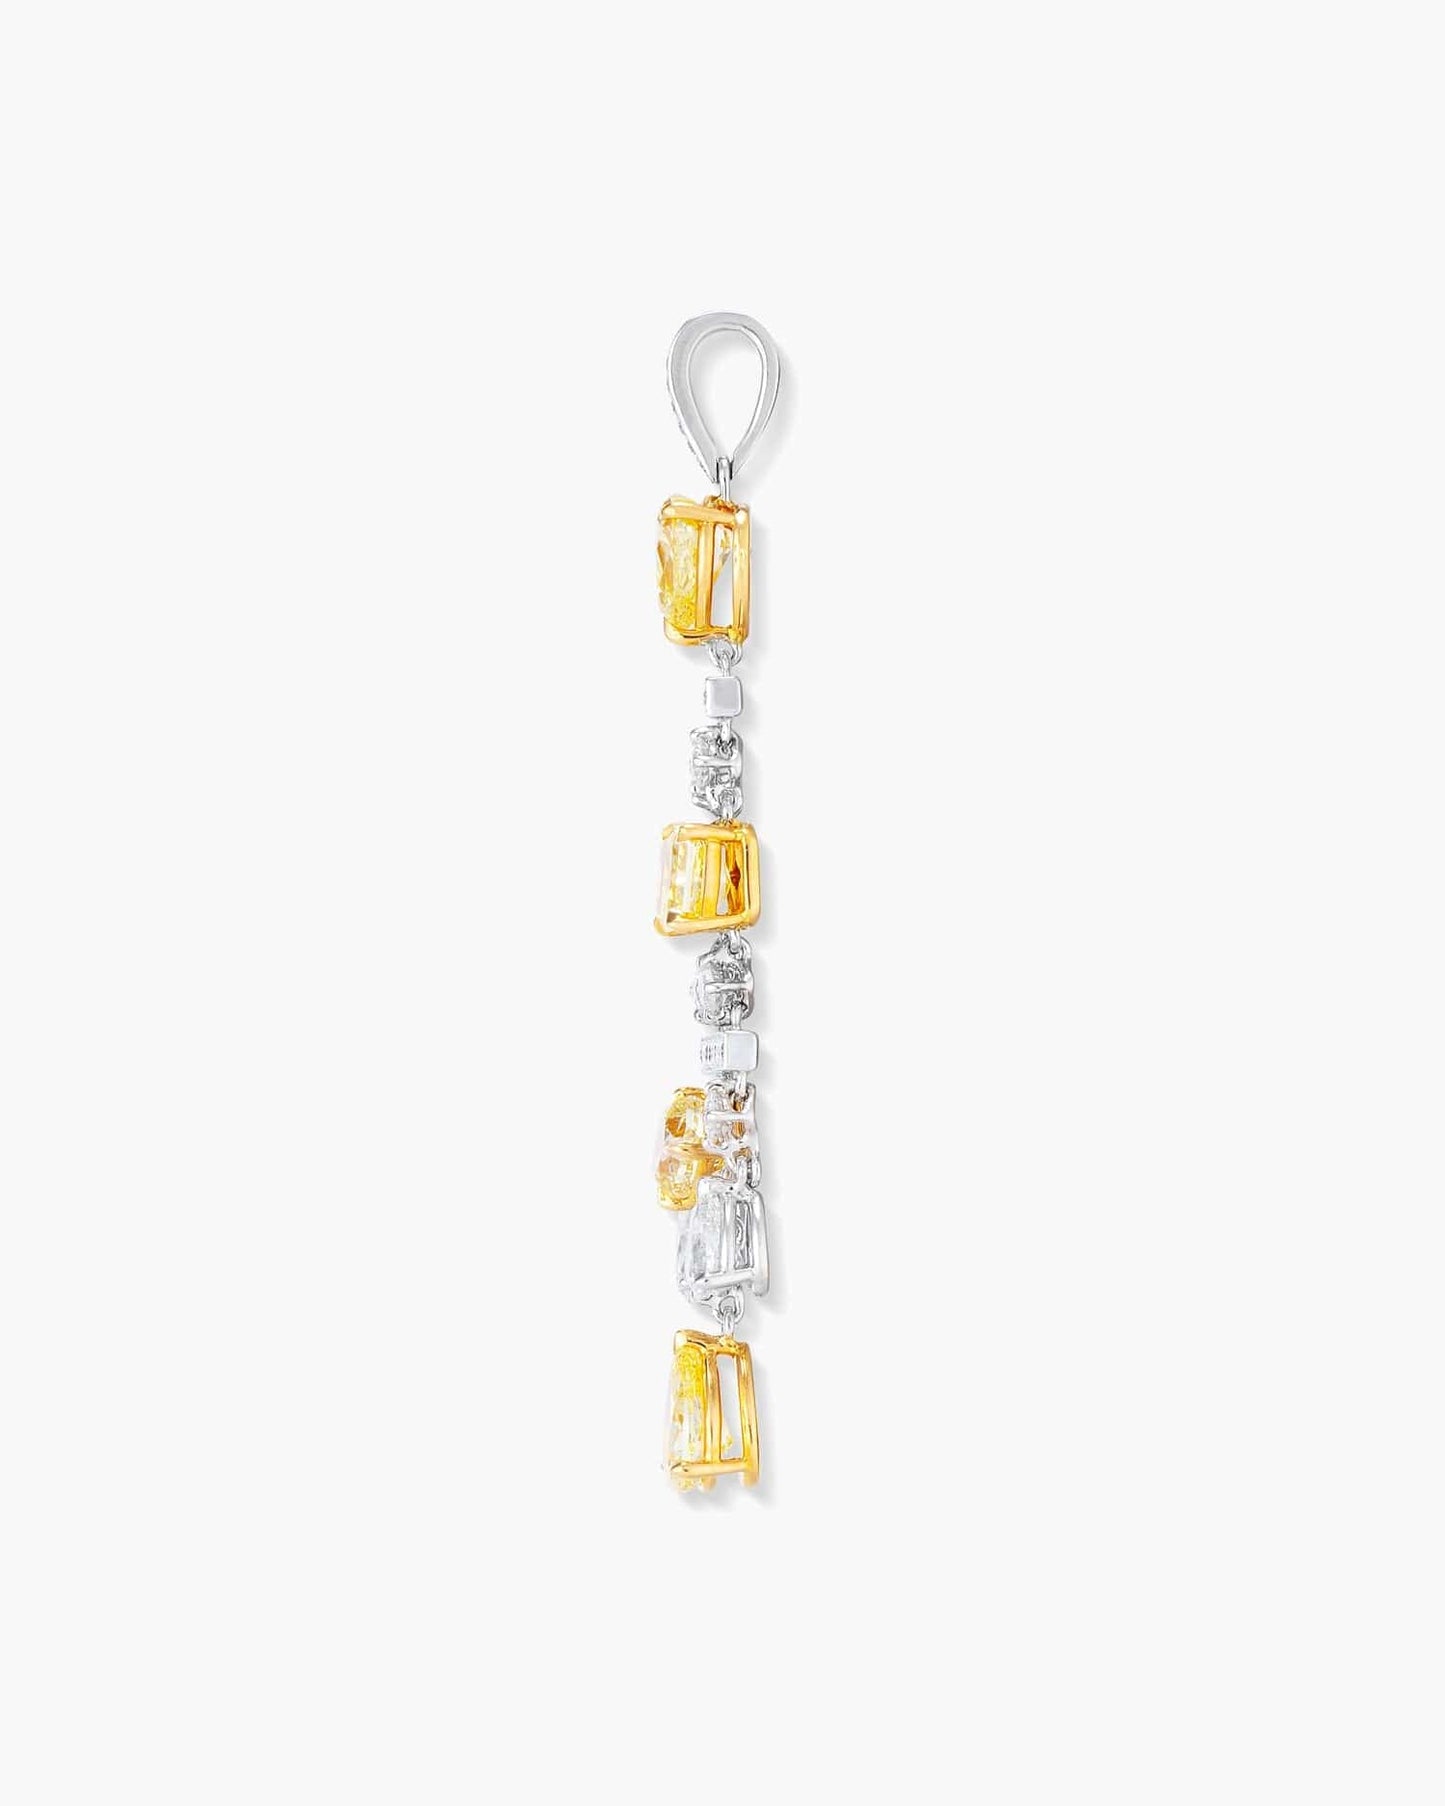 Fancy Shaped Yellow and White Diamond Pendant Necklace, 3.71 carats